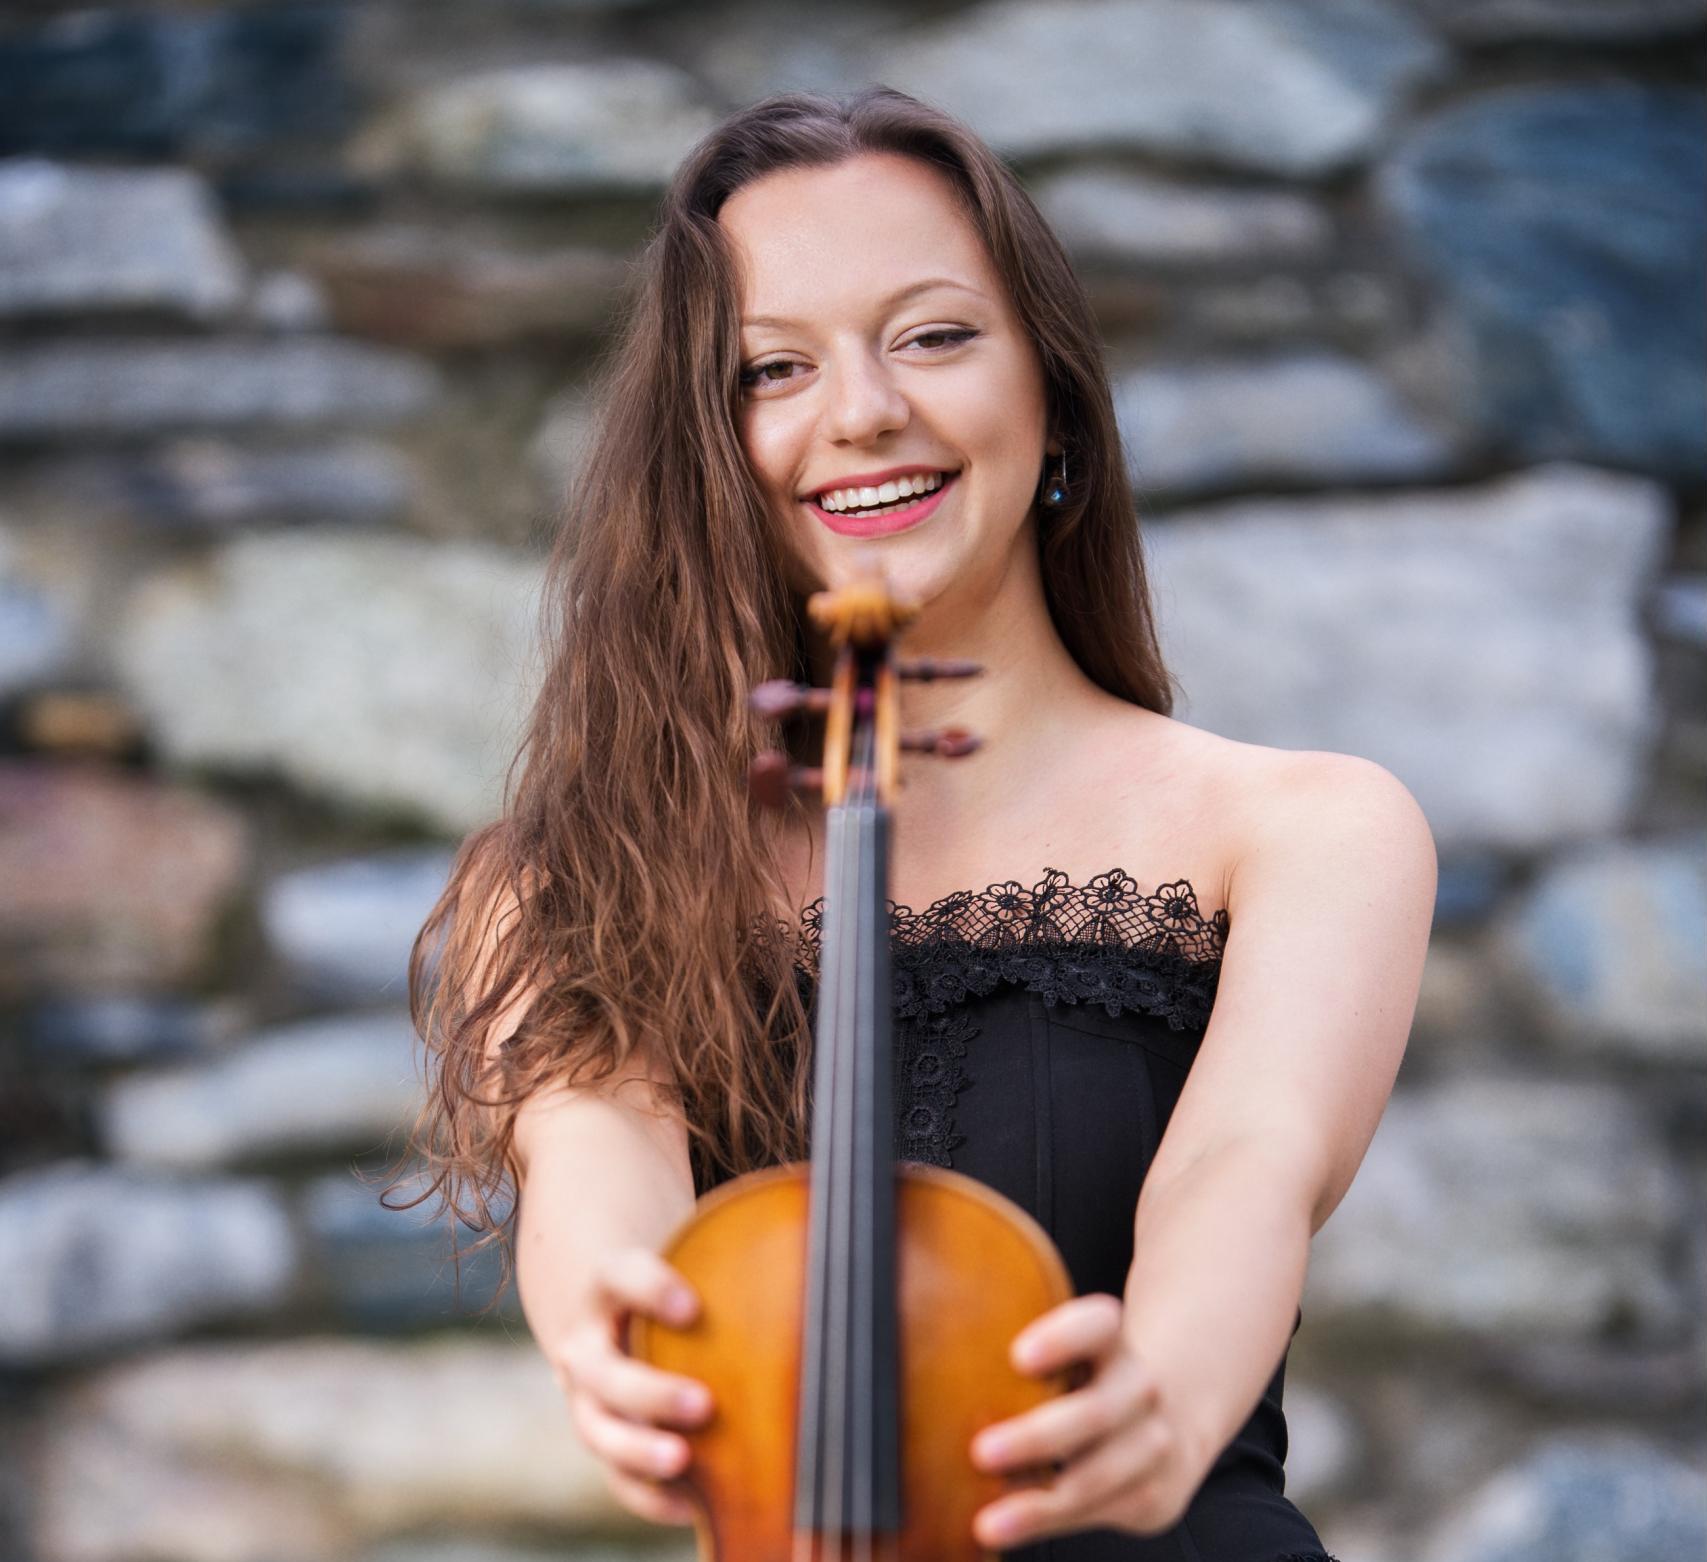 Violinist Maria Ioudenitch stands in front of a stone wall, laughing and holding her violin up to the camera.